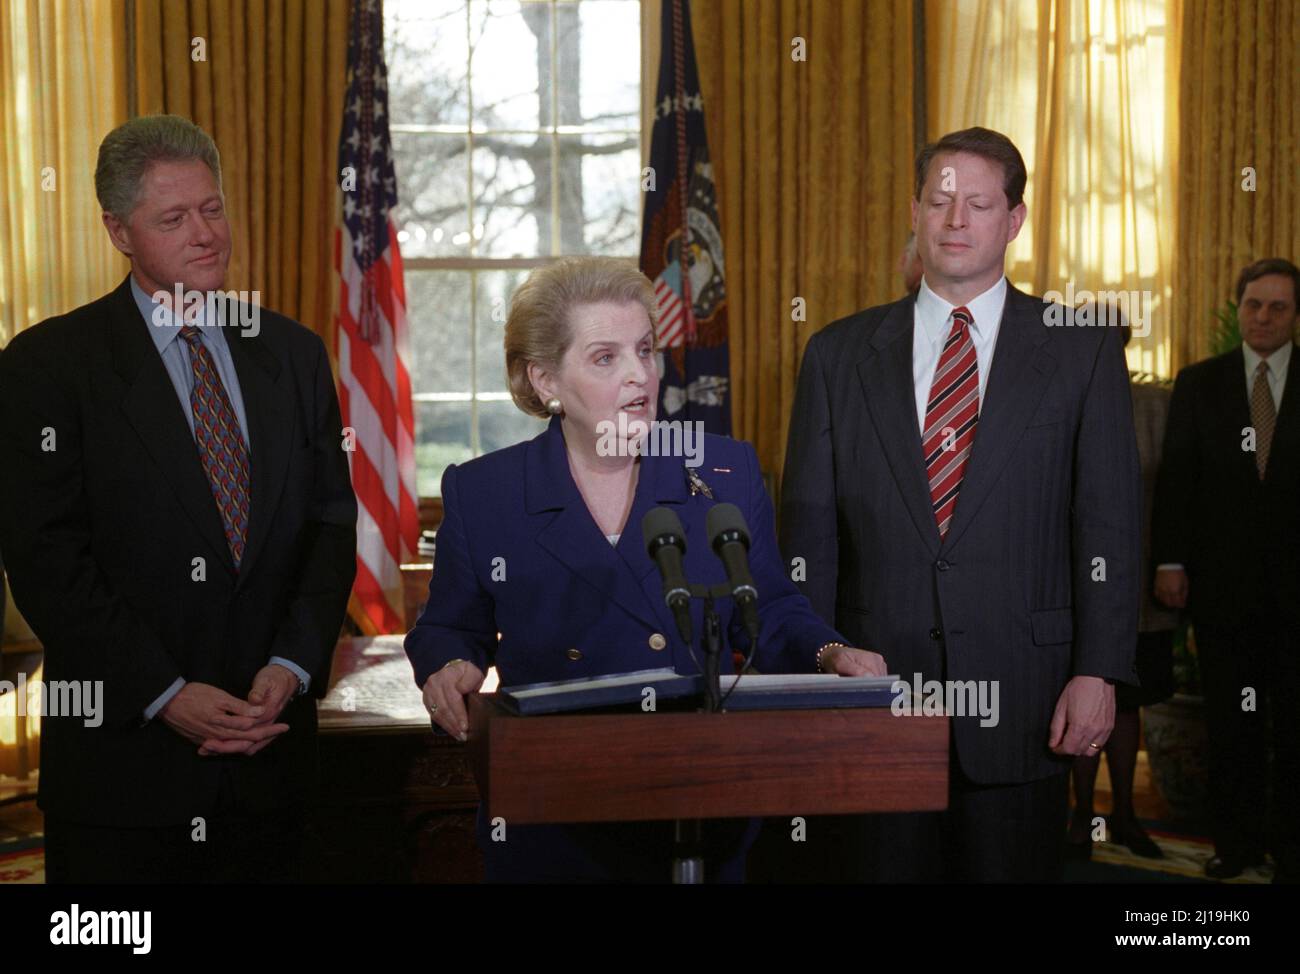 1997 , 23 january , Washington , USA : The american politician MADELEINE Korbel ALBRIGHT ( Marie Jana Korbelova , 1937 - 2022 ), was an American diplomat who served as the 64th United States Secretary of State from 1997 to 2001 under President Bill Clinton . She was the first female secretary of state in U.S. history.  In this photo with president CLINTON and vice-President AL GORE , Albright speaks at her swearing-in ceremoney as Secretary of State . Photo by Official Staff photographer of White House for United States Department of State . -  Segratario di stato donna alla Presidenza degli S Stock Photo